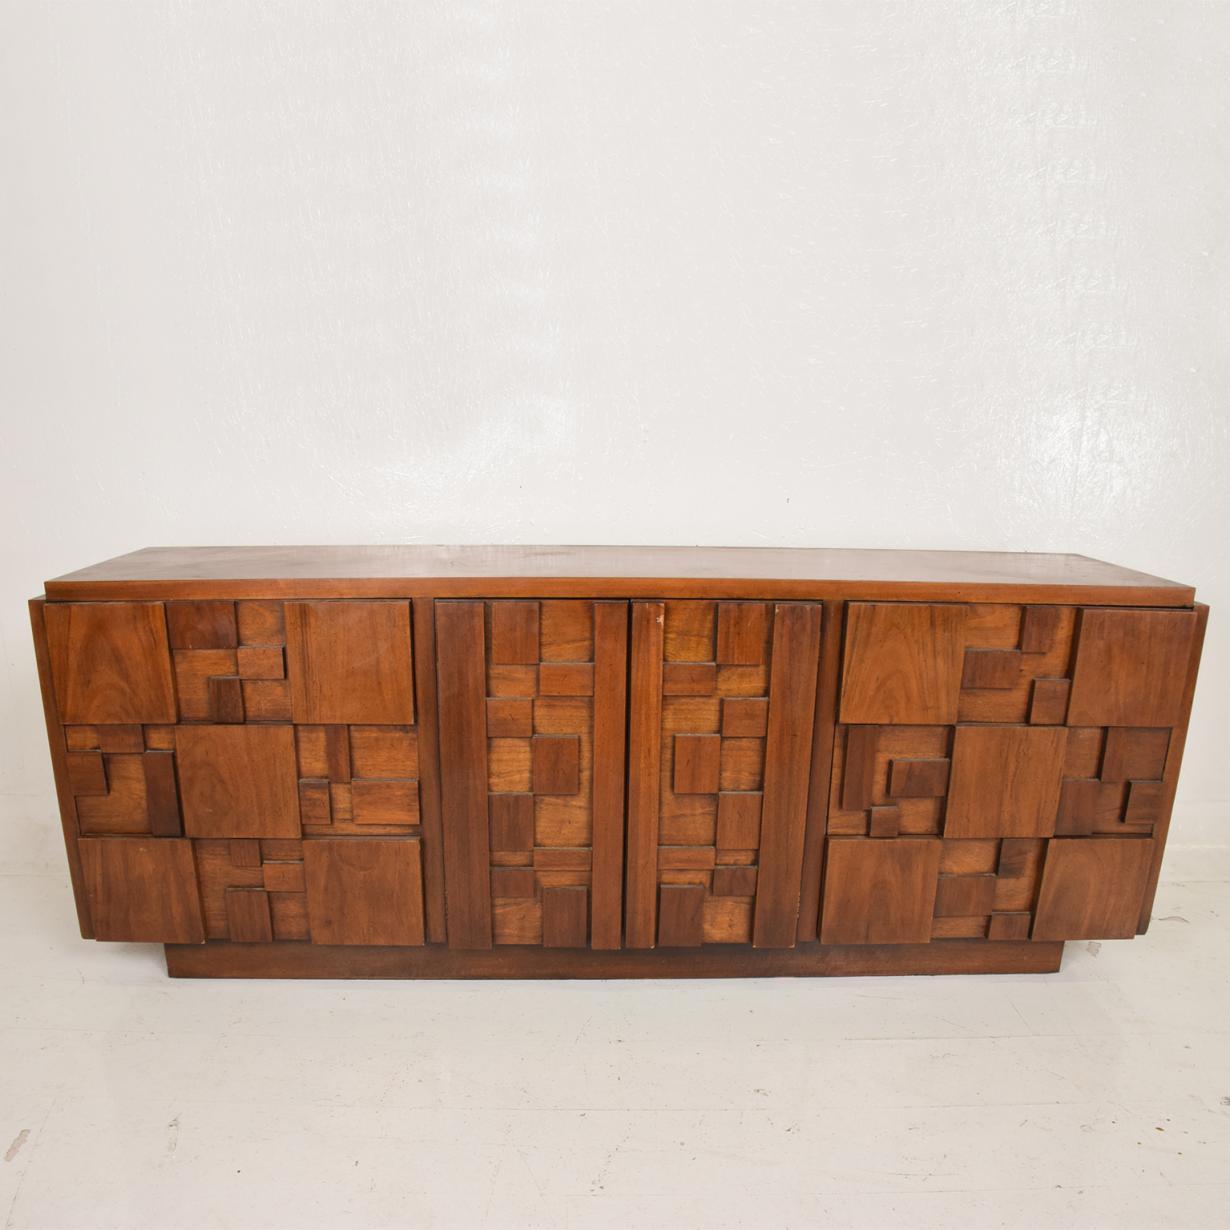 For your consideration, a Mid-Century Modern Brutalist dresser by Lane Patchwork Walnut Tiles. Made in the USA, circa 1970s. Dimensions: 78